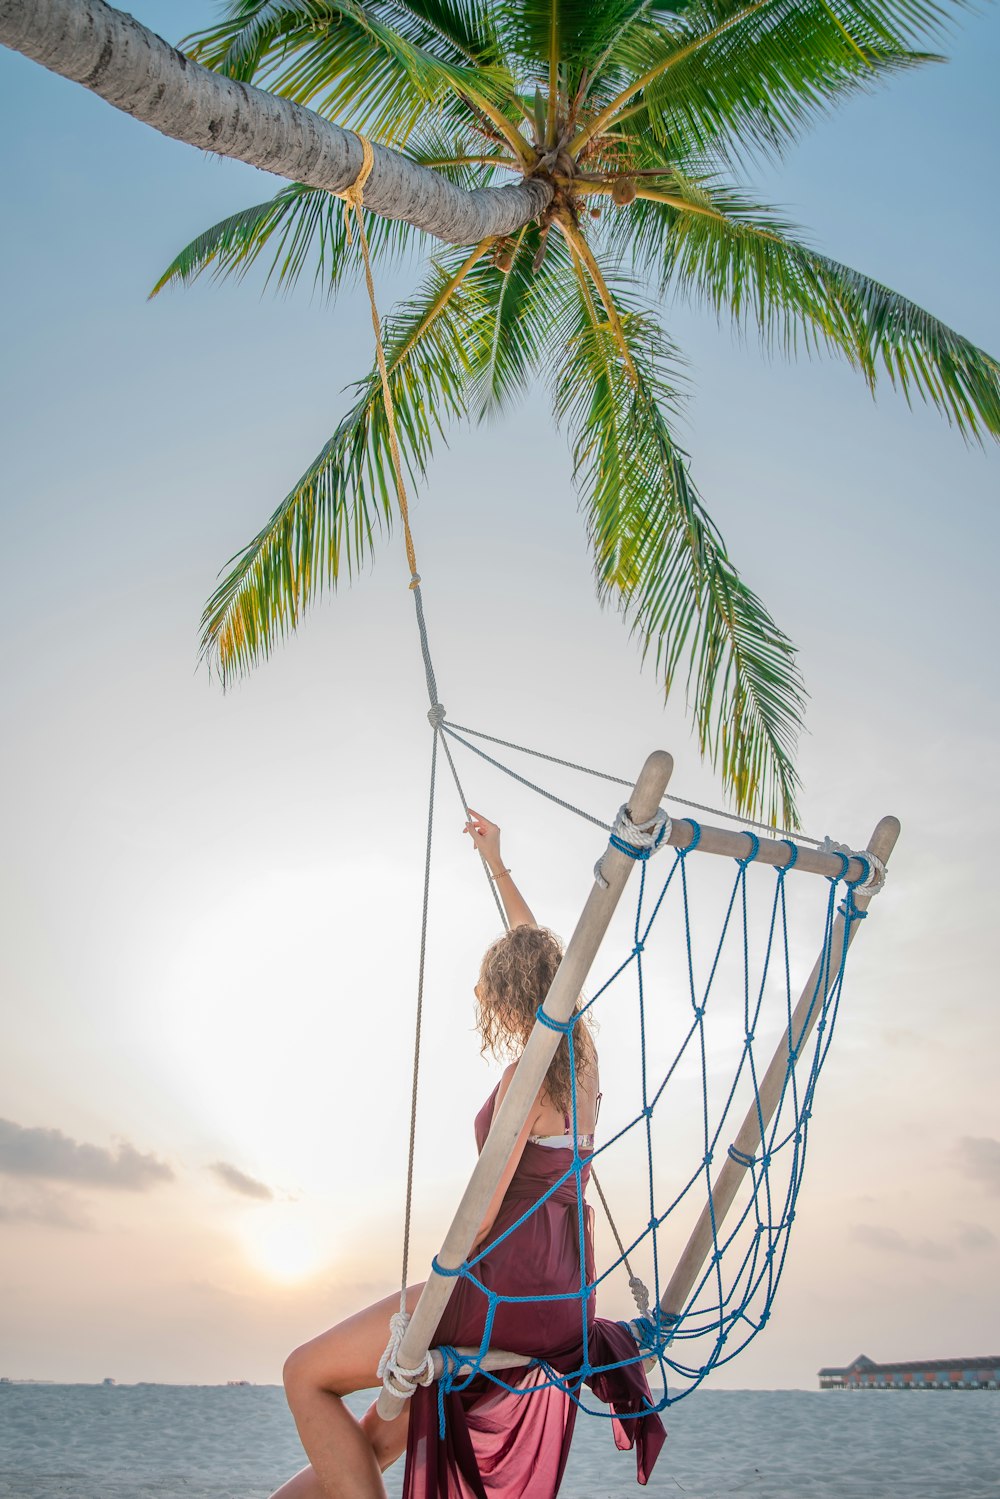 woman riding swing tied to a coconut tree on island during day